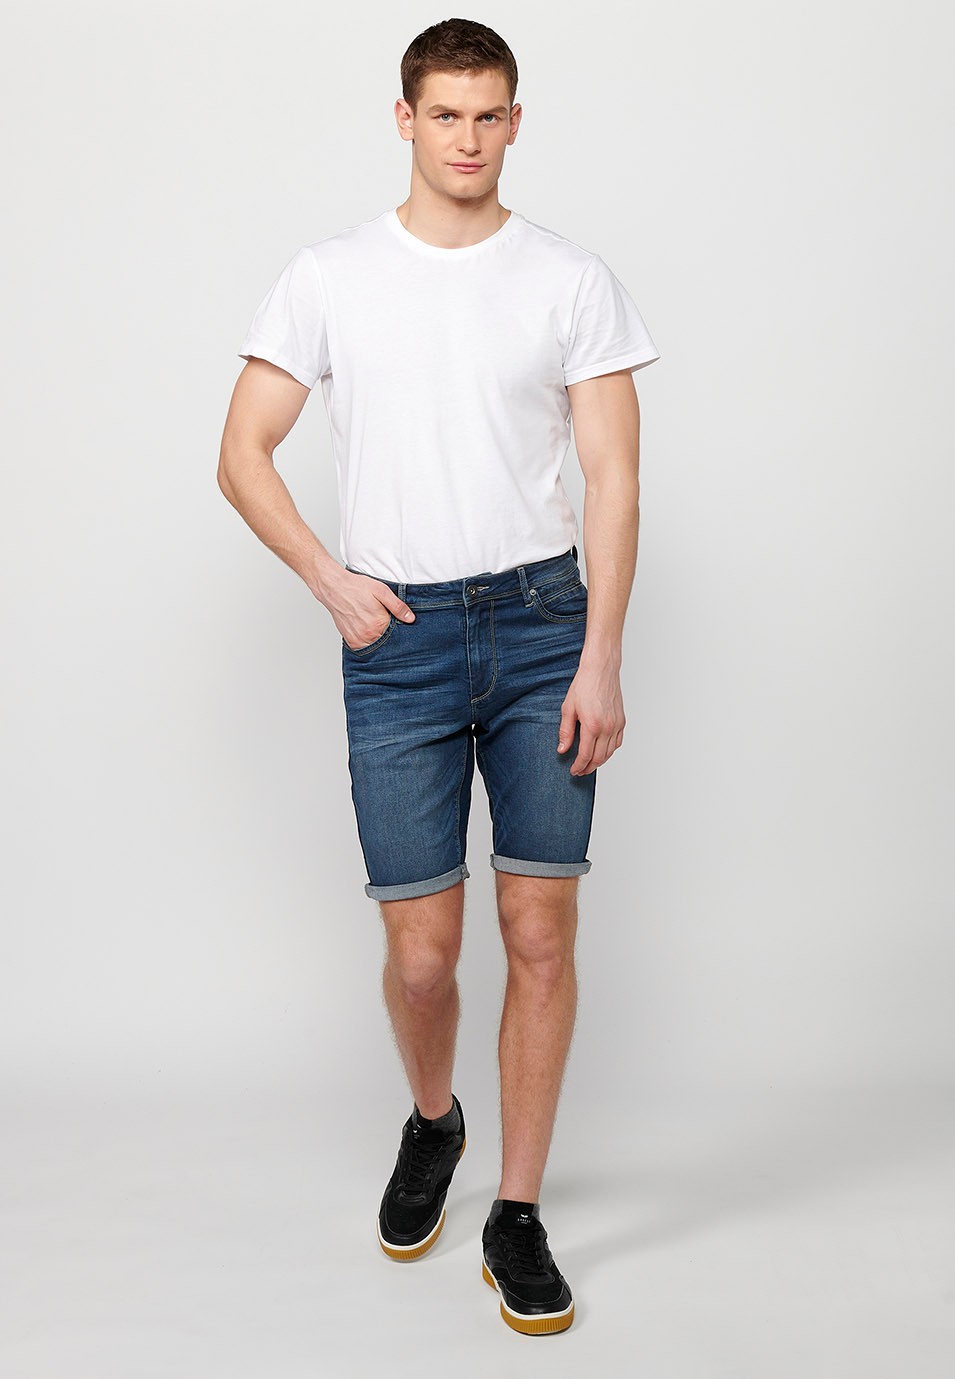 Blue Denim Bermuda Shorts with Turn-Up Finish and Front Zipper and Button Closure for Men